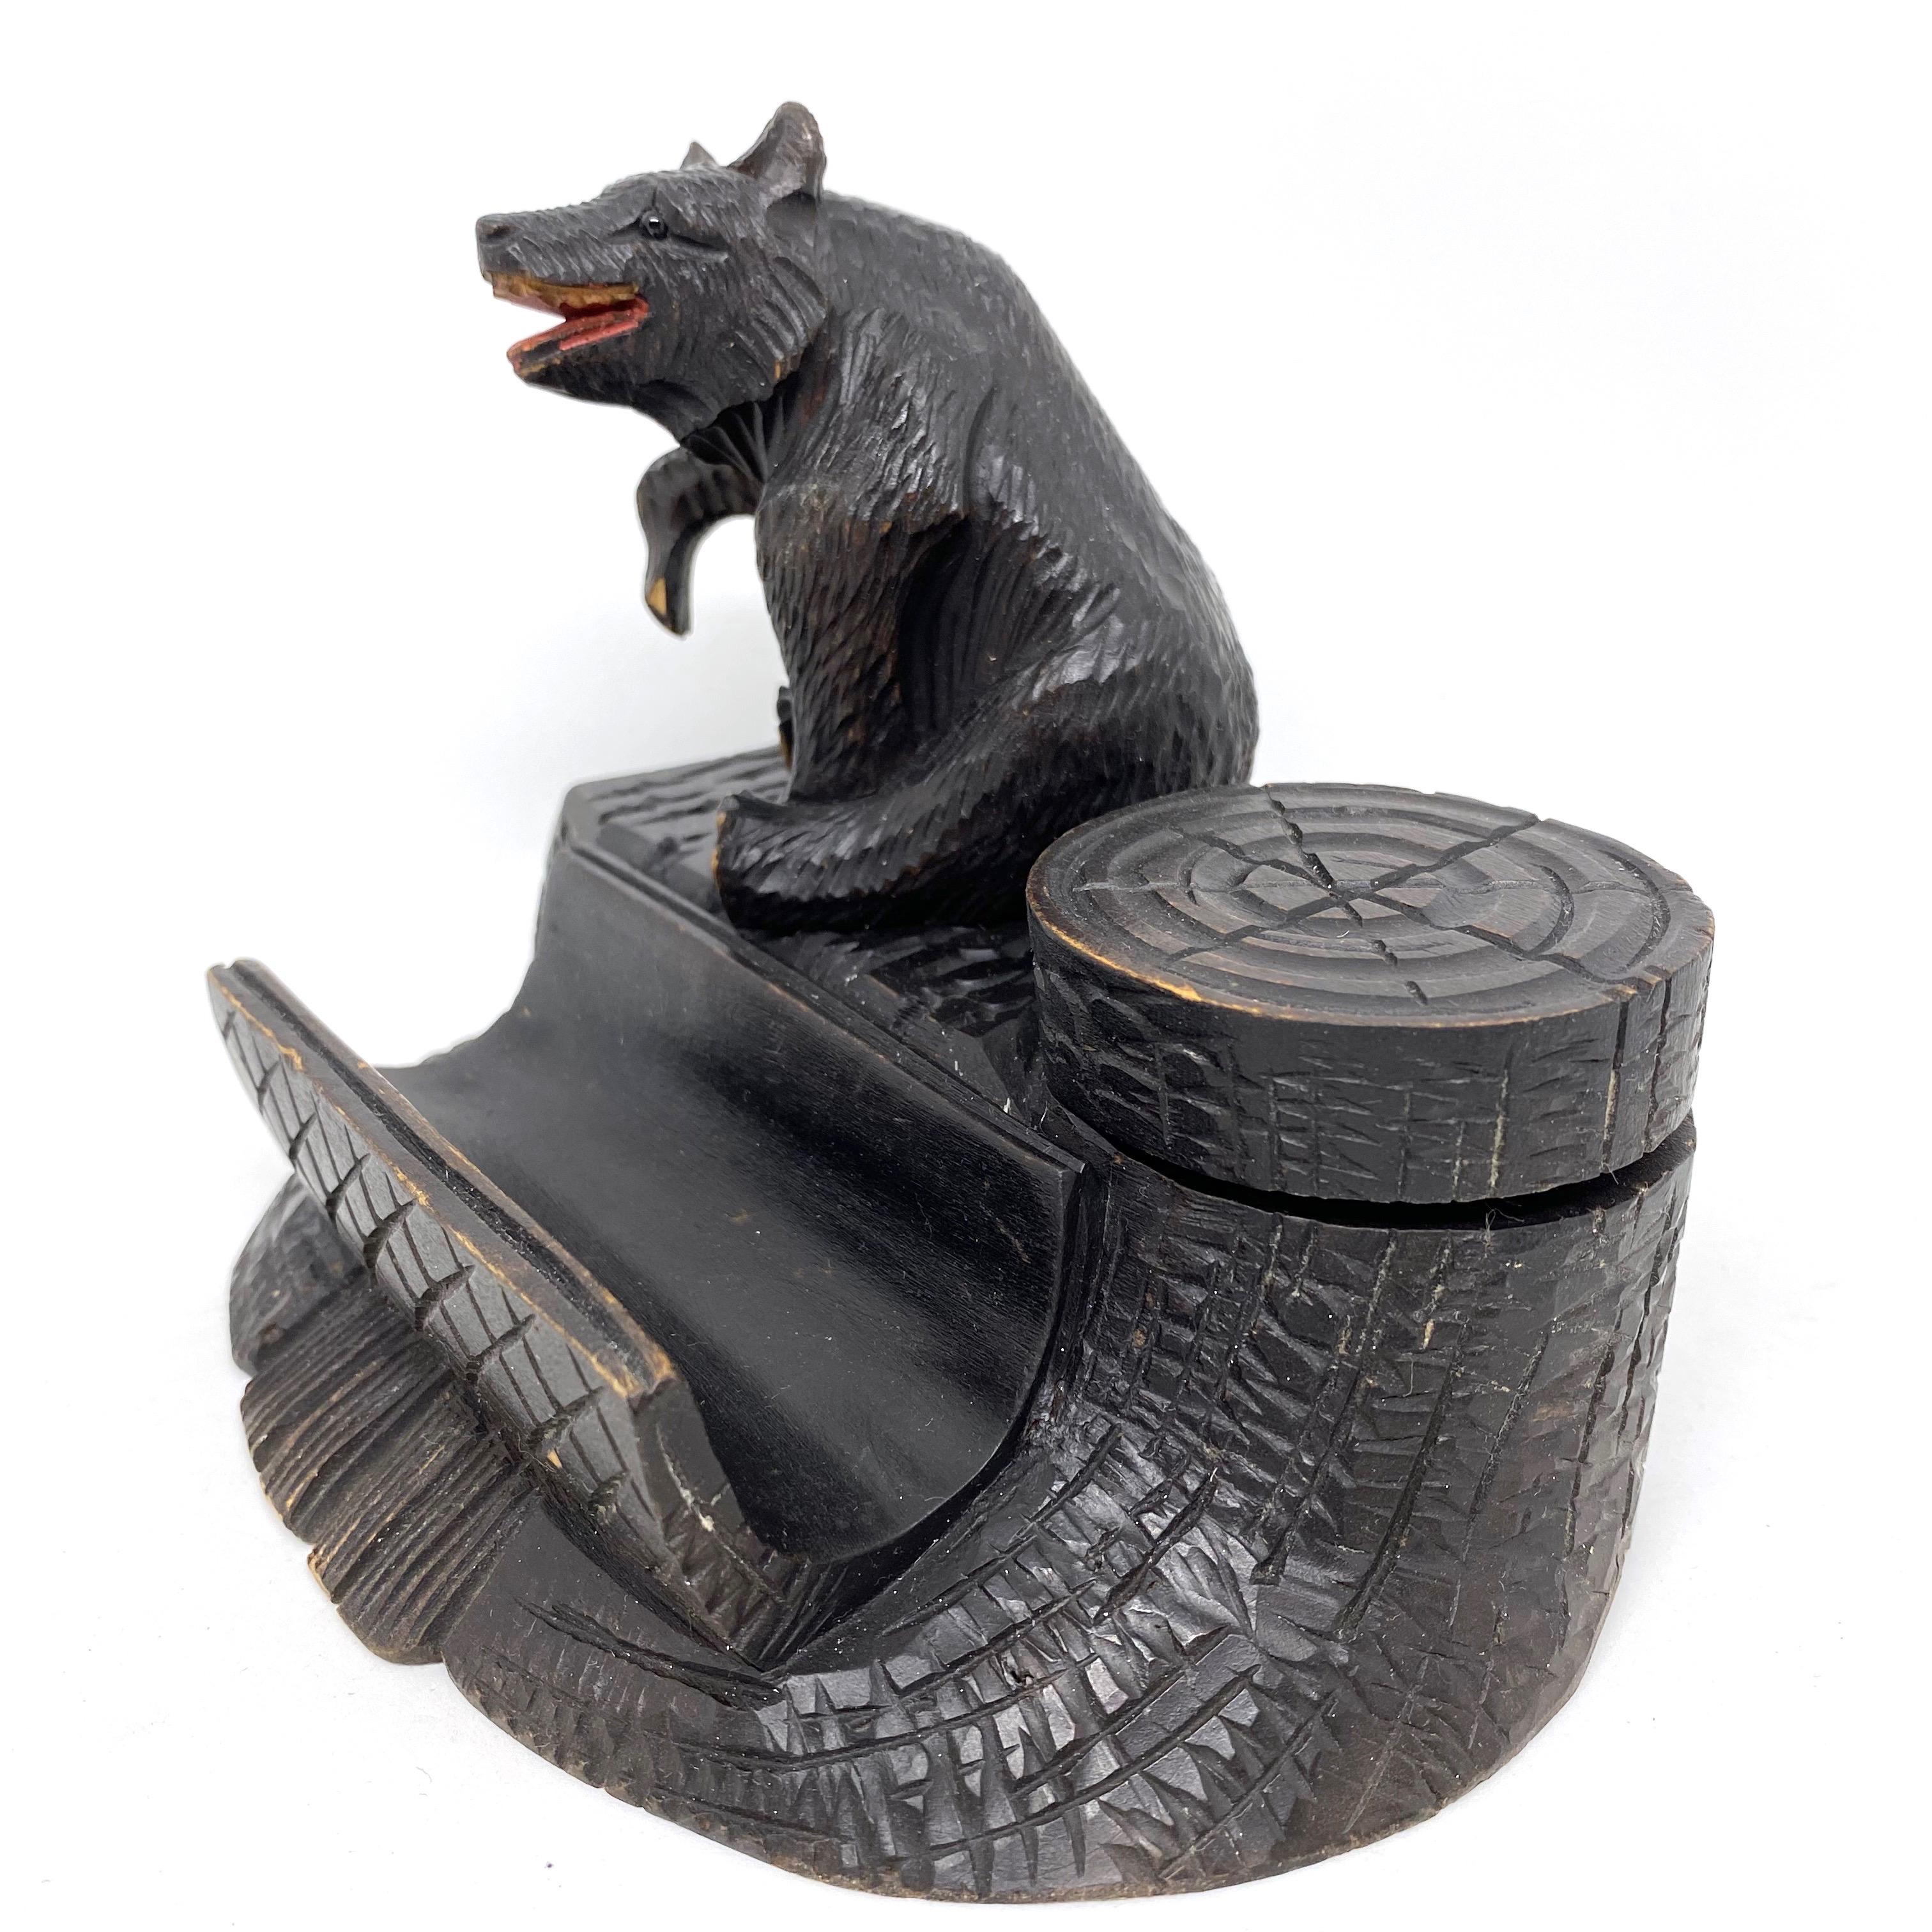 Classic 1890s black forest Brienz wood carved inkwell in form of a Bear. Nice addition to your room or just for use it on your desk. Made of hand carved wood and glass eyes. Found at an estate sale in Vienna, Austria.